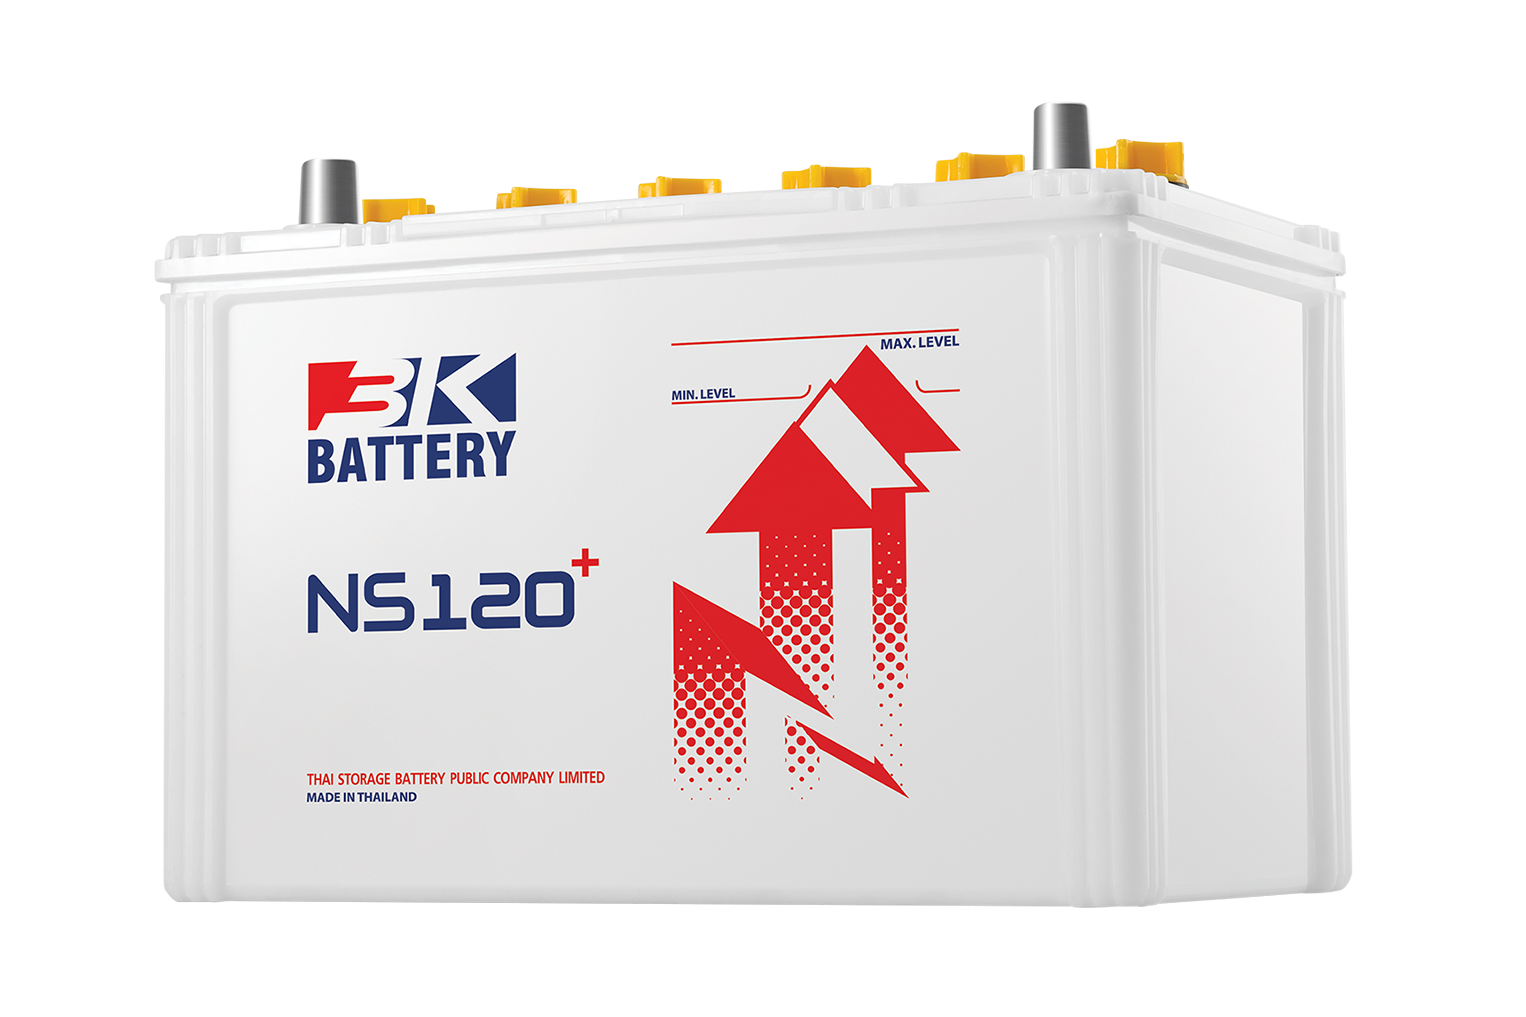 Battery 3K NS120L (Conventional Type) 12V 85Ah